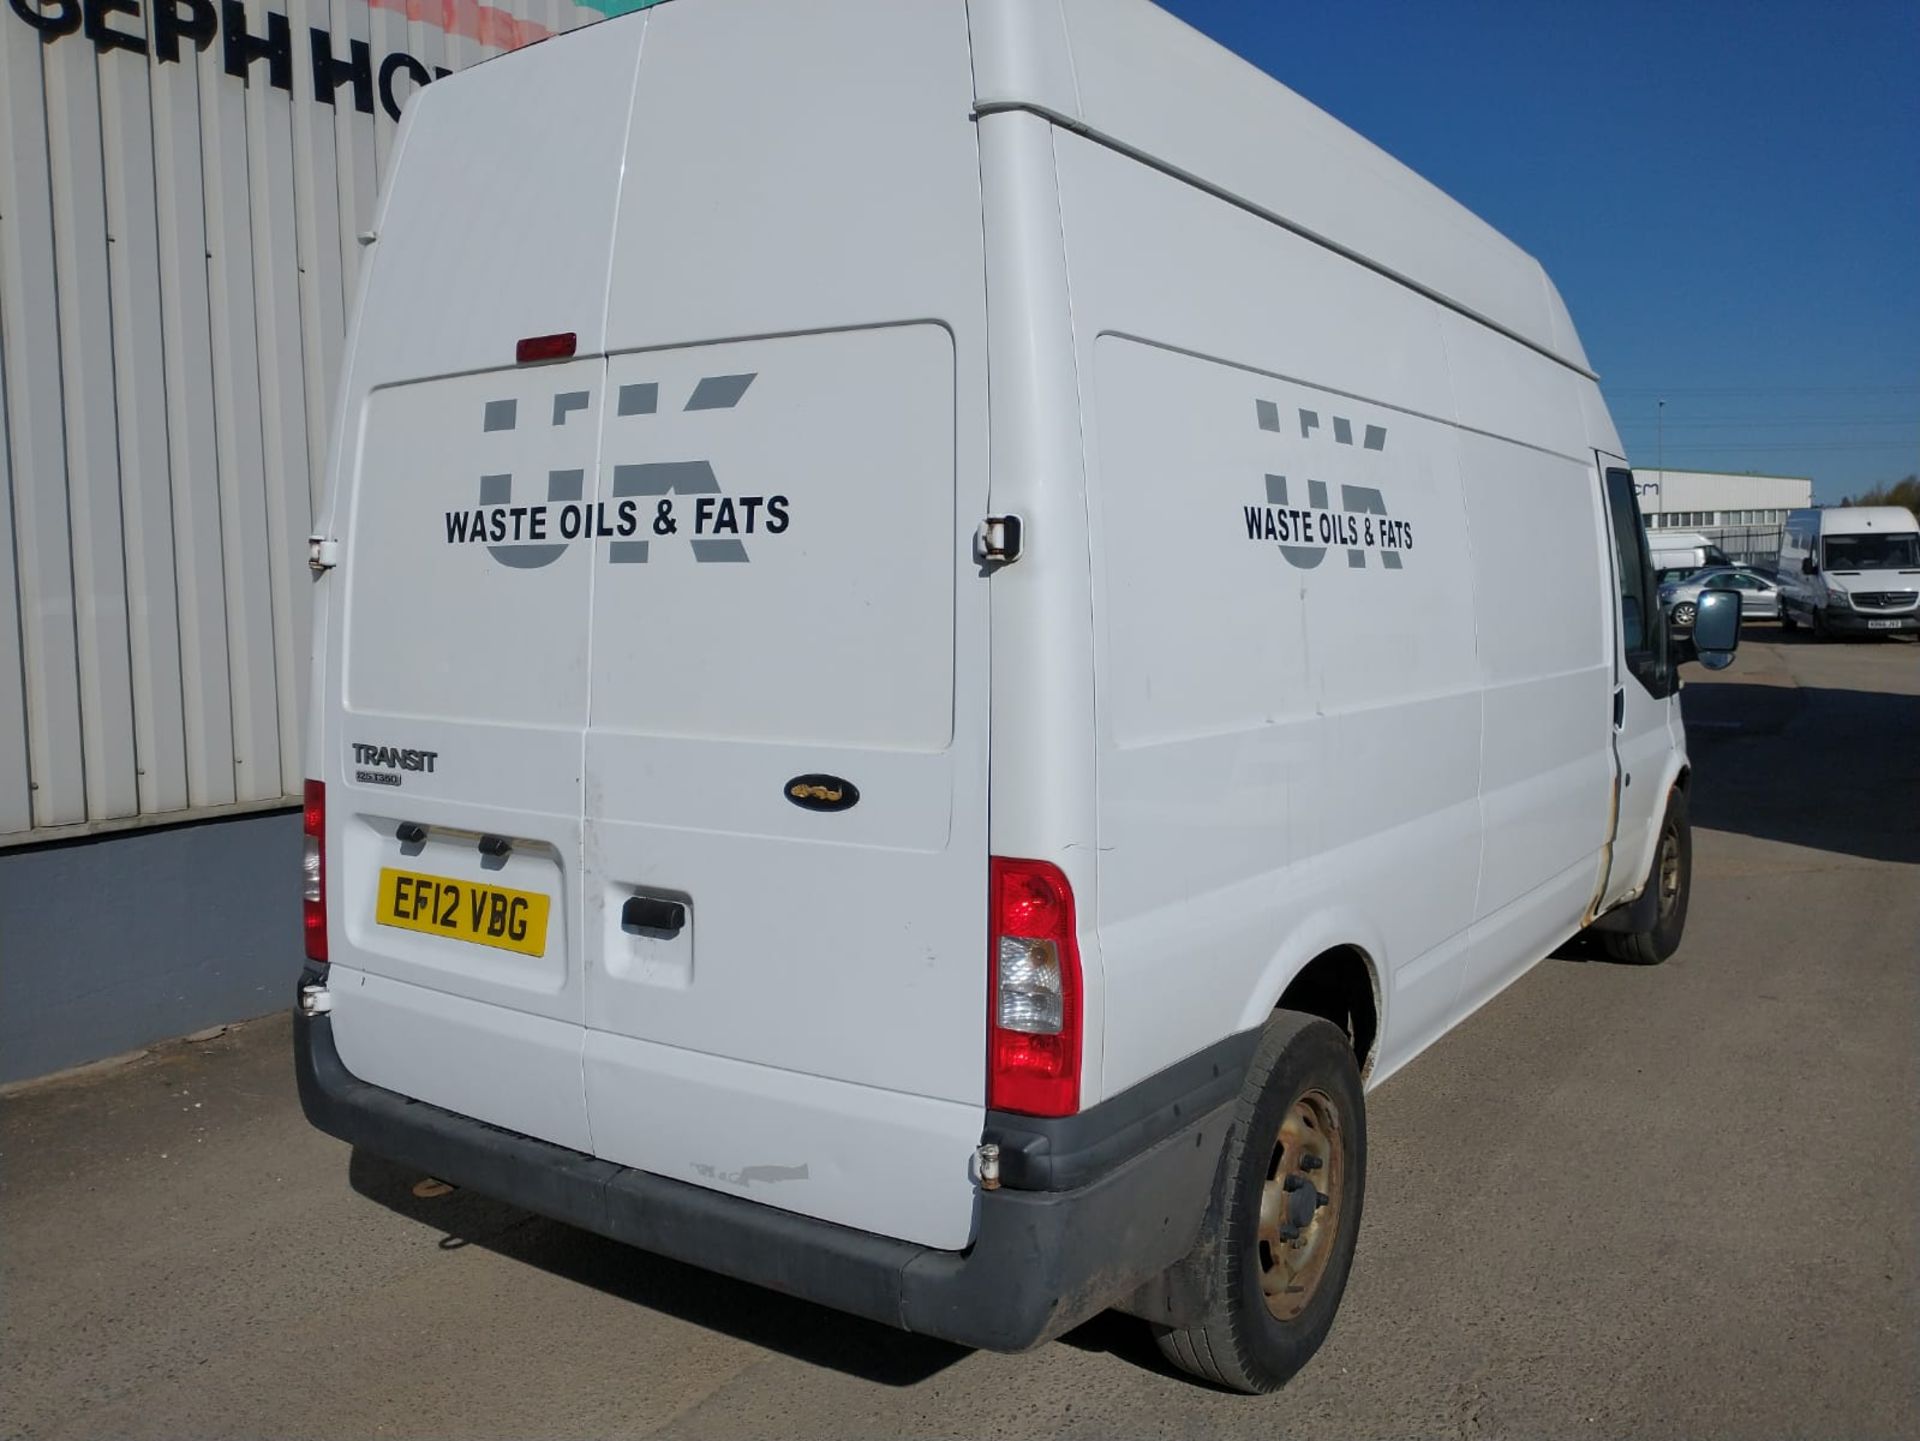 2012 Ford Transit Panel Van 2.2 5dr Medium Roof Panel Van - CL505 - Location: Corby - Image 5 of 13